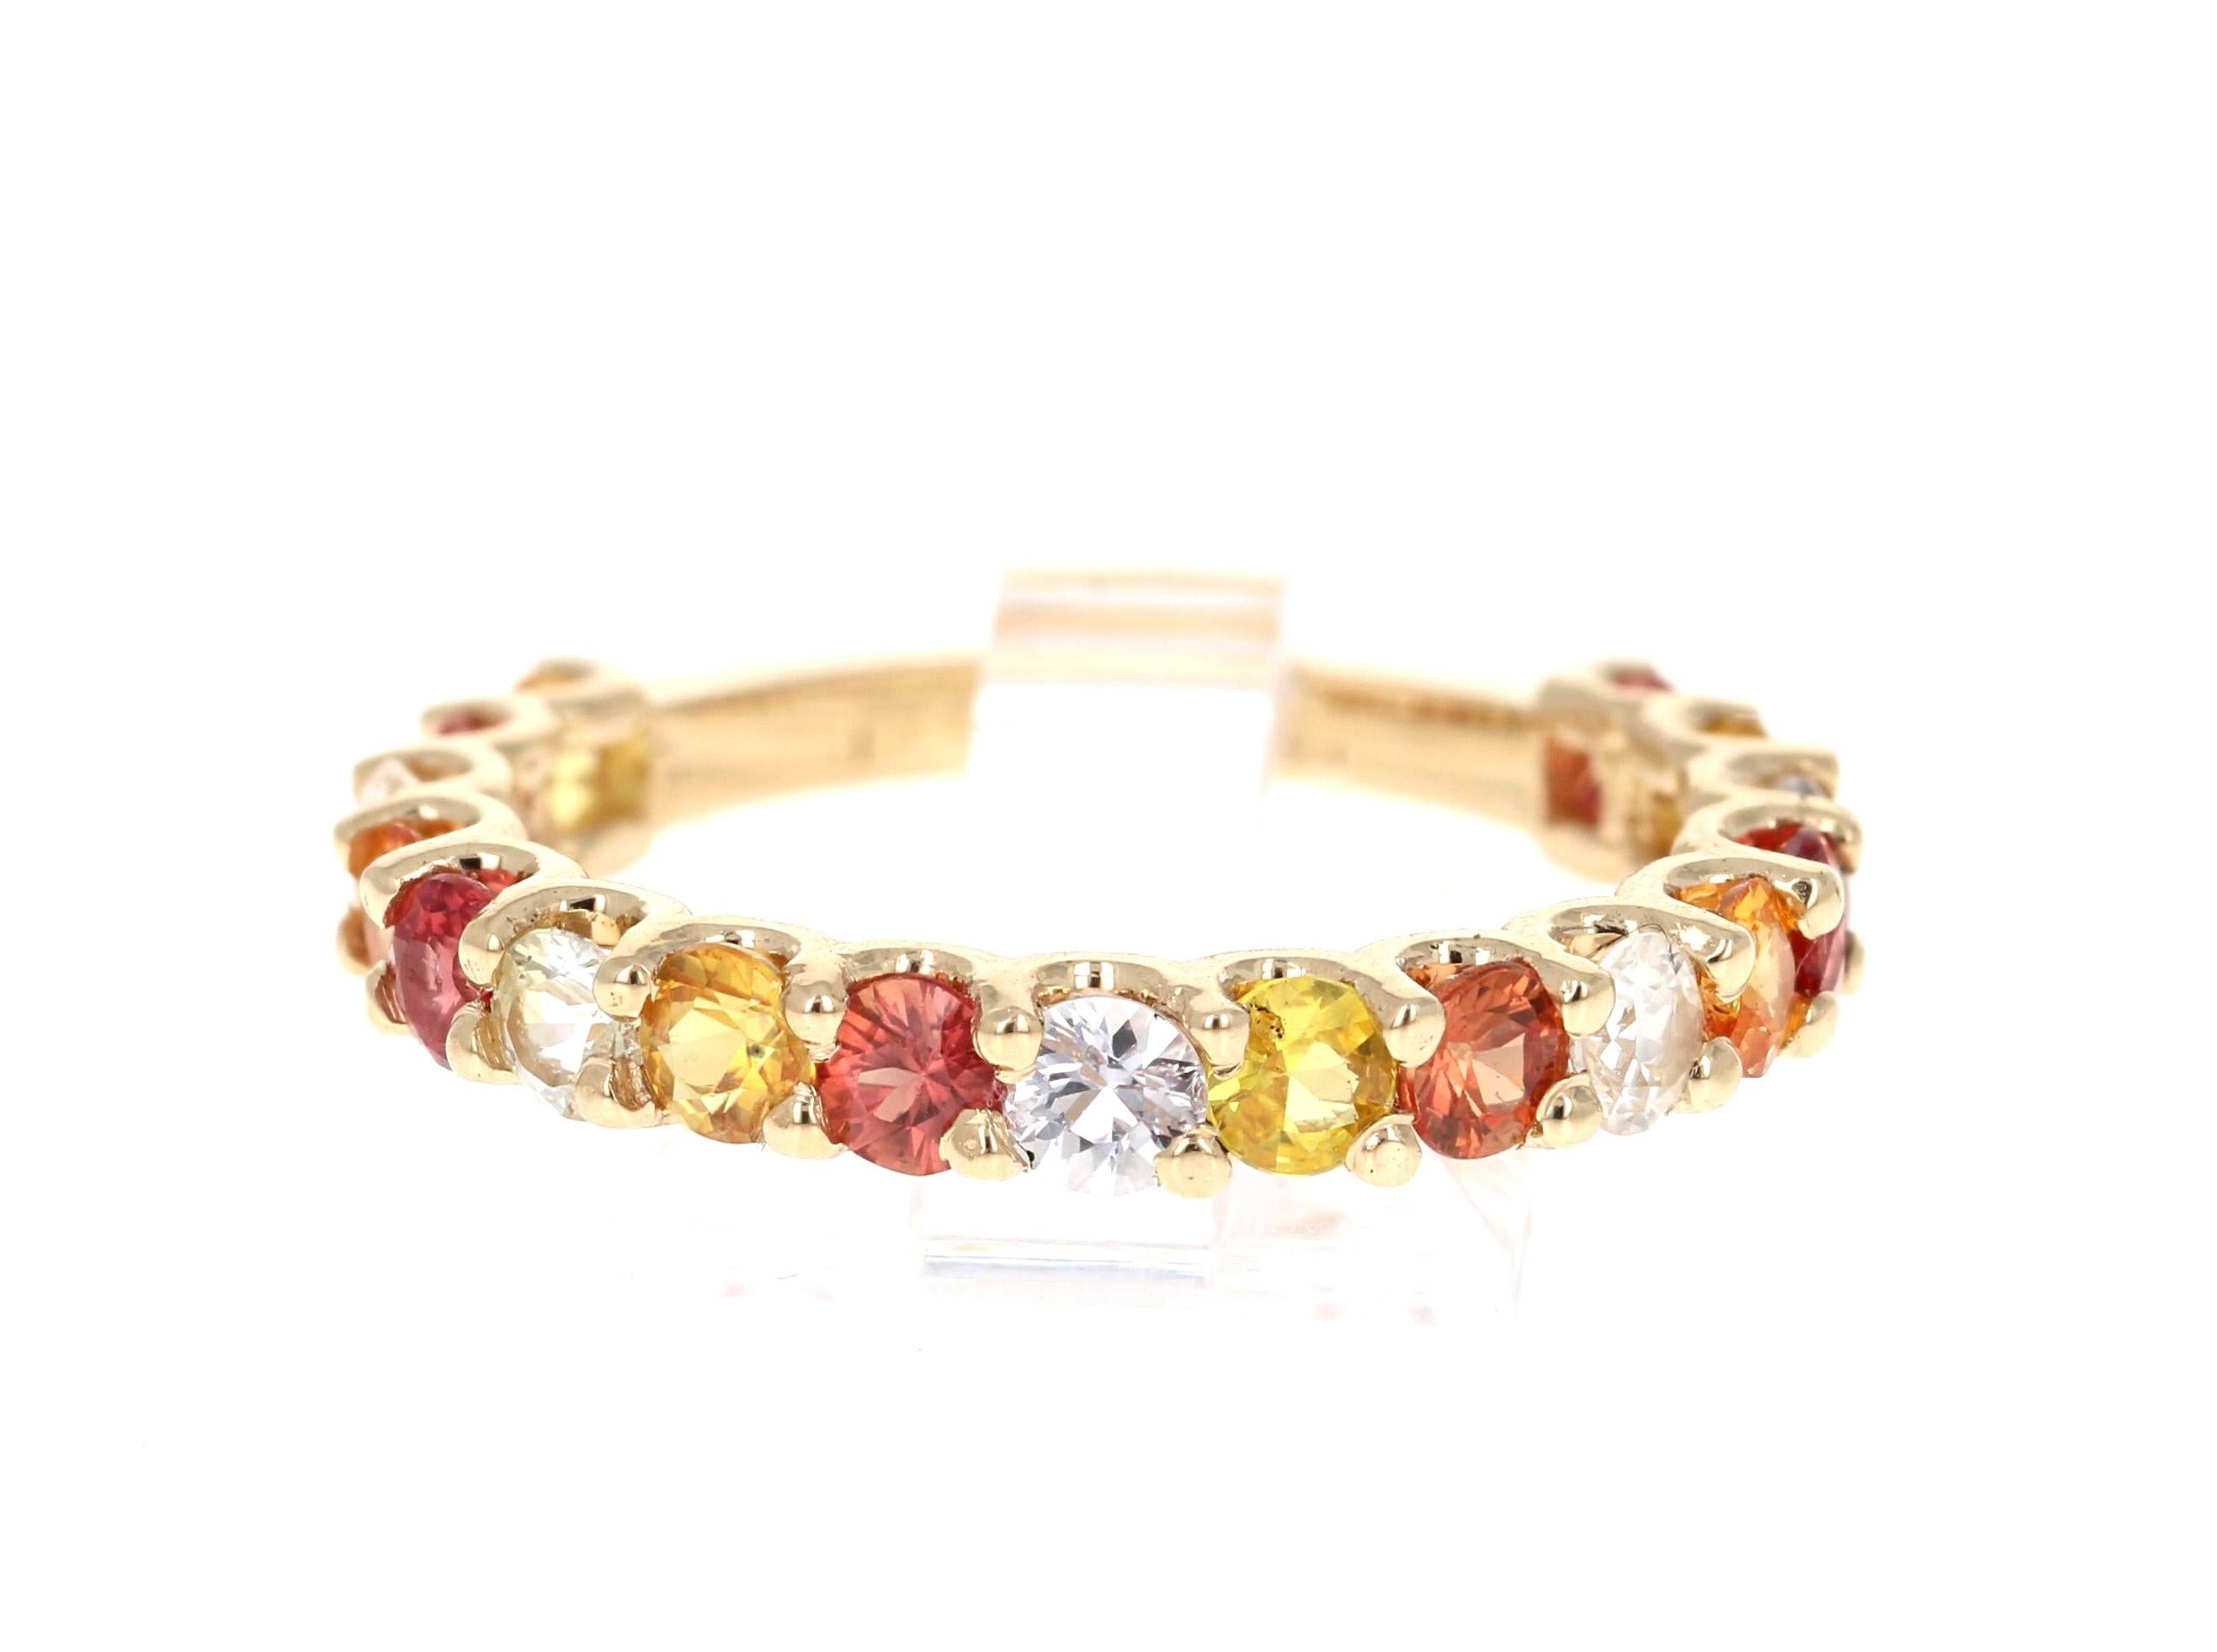 There are 17 Multi Color Genuine Sapphires in this band that weigh 2.92 Carats.  
It is perfect for everyday wear and looks amazing stacked or alone.  They are versatile and can jazz up to any outfit and occasion!   If you wish to purchase all 3 of